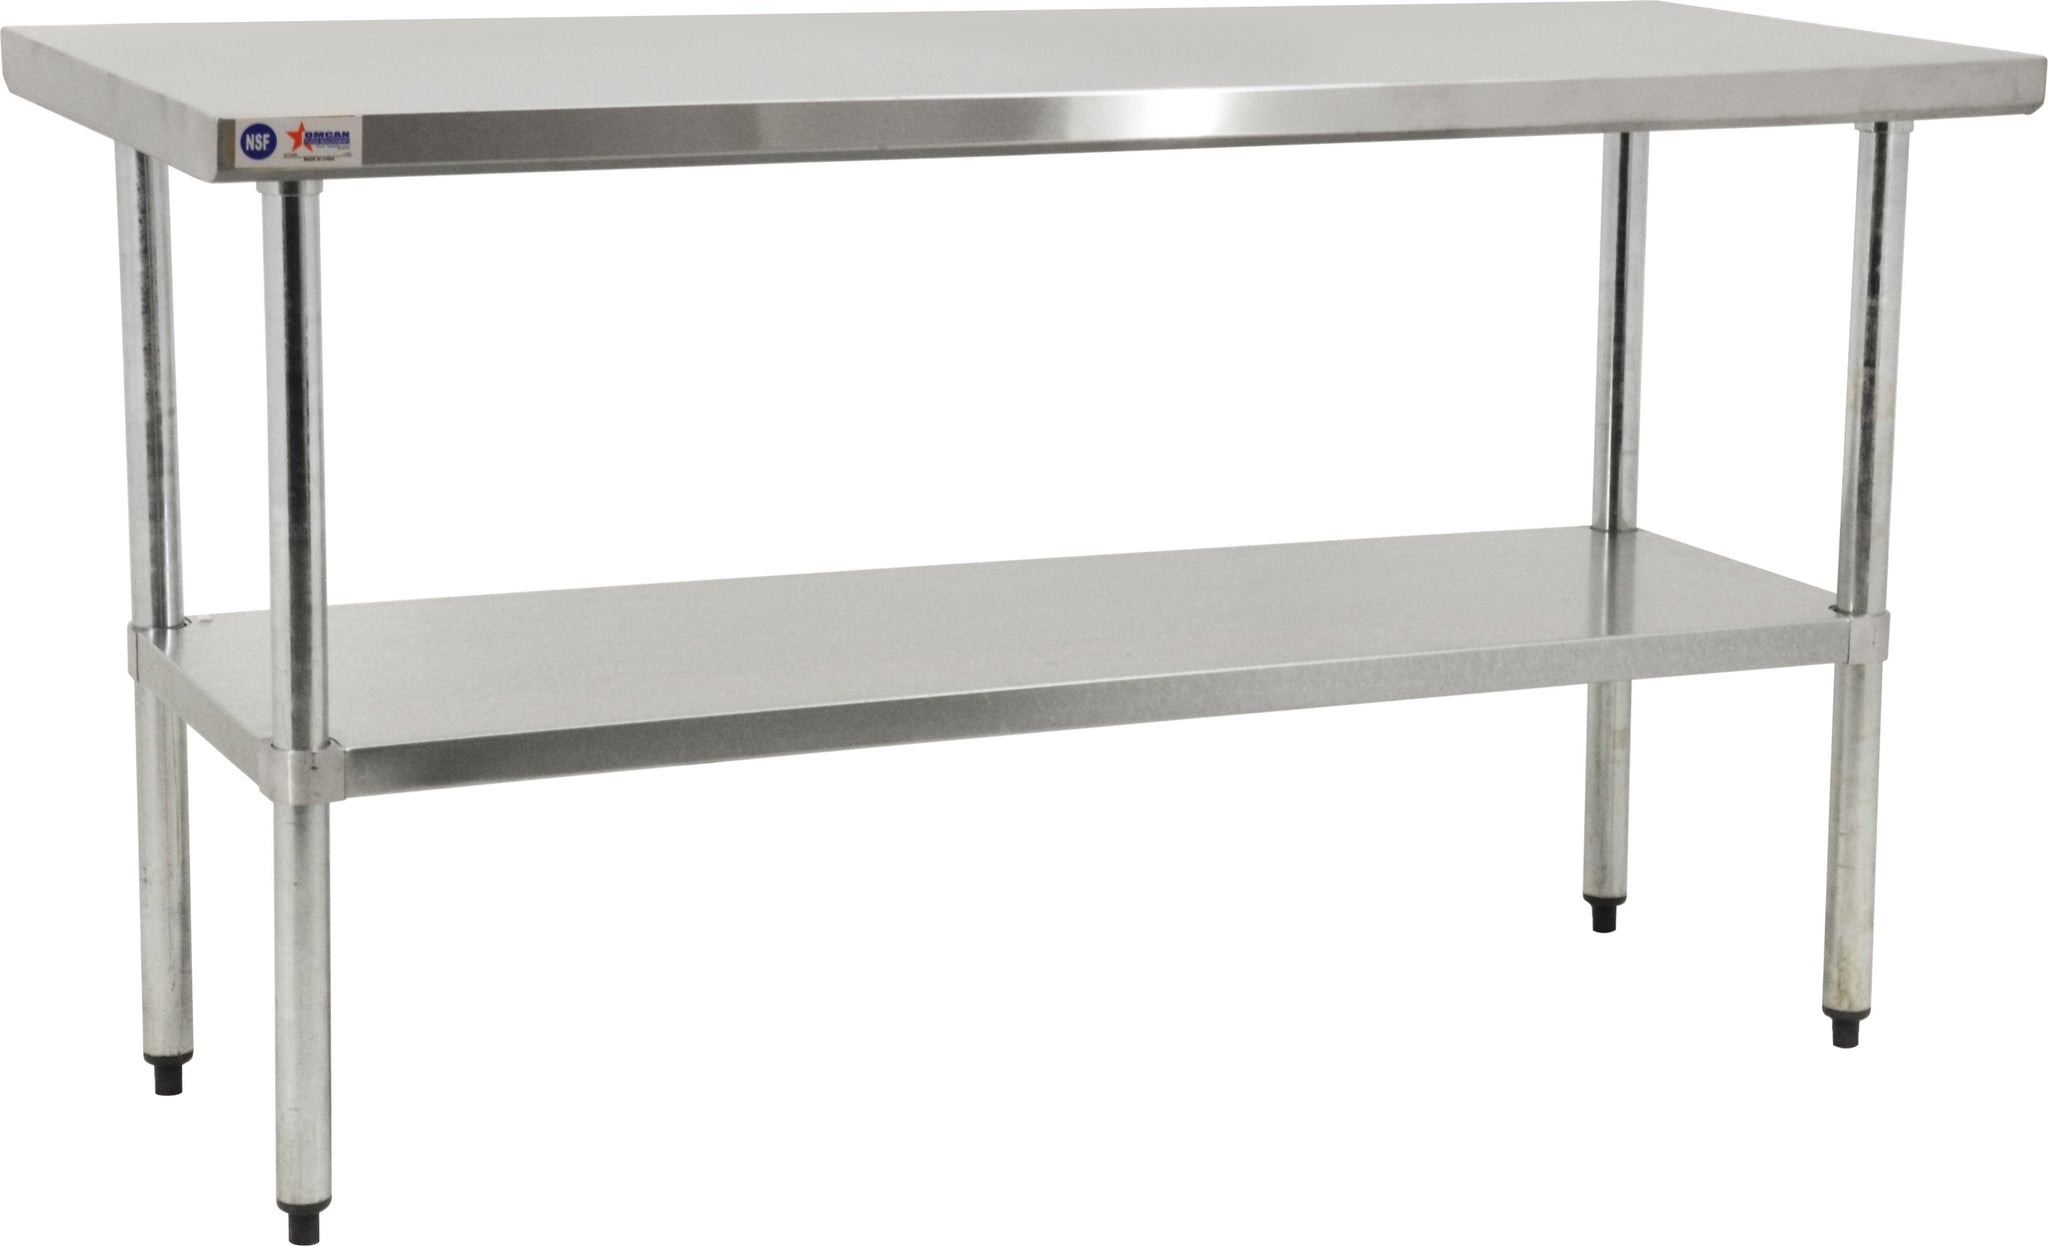 Omcan - 24” x 30” Stainless Steel Work Table - 19136